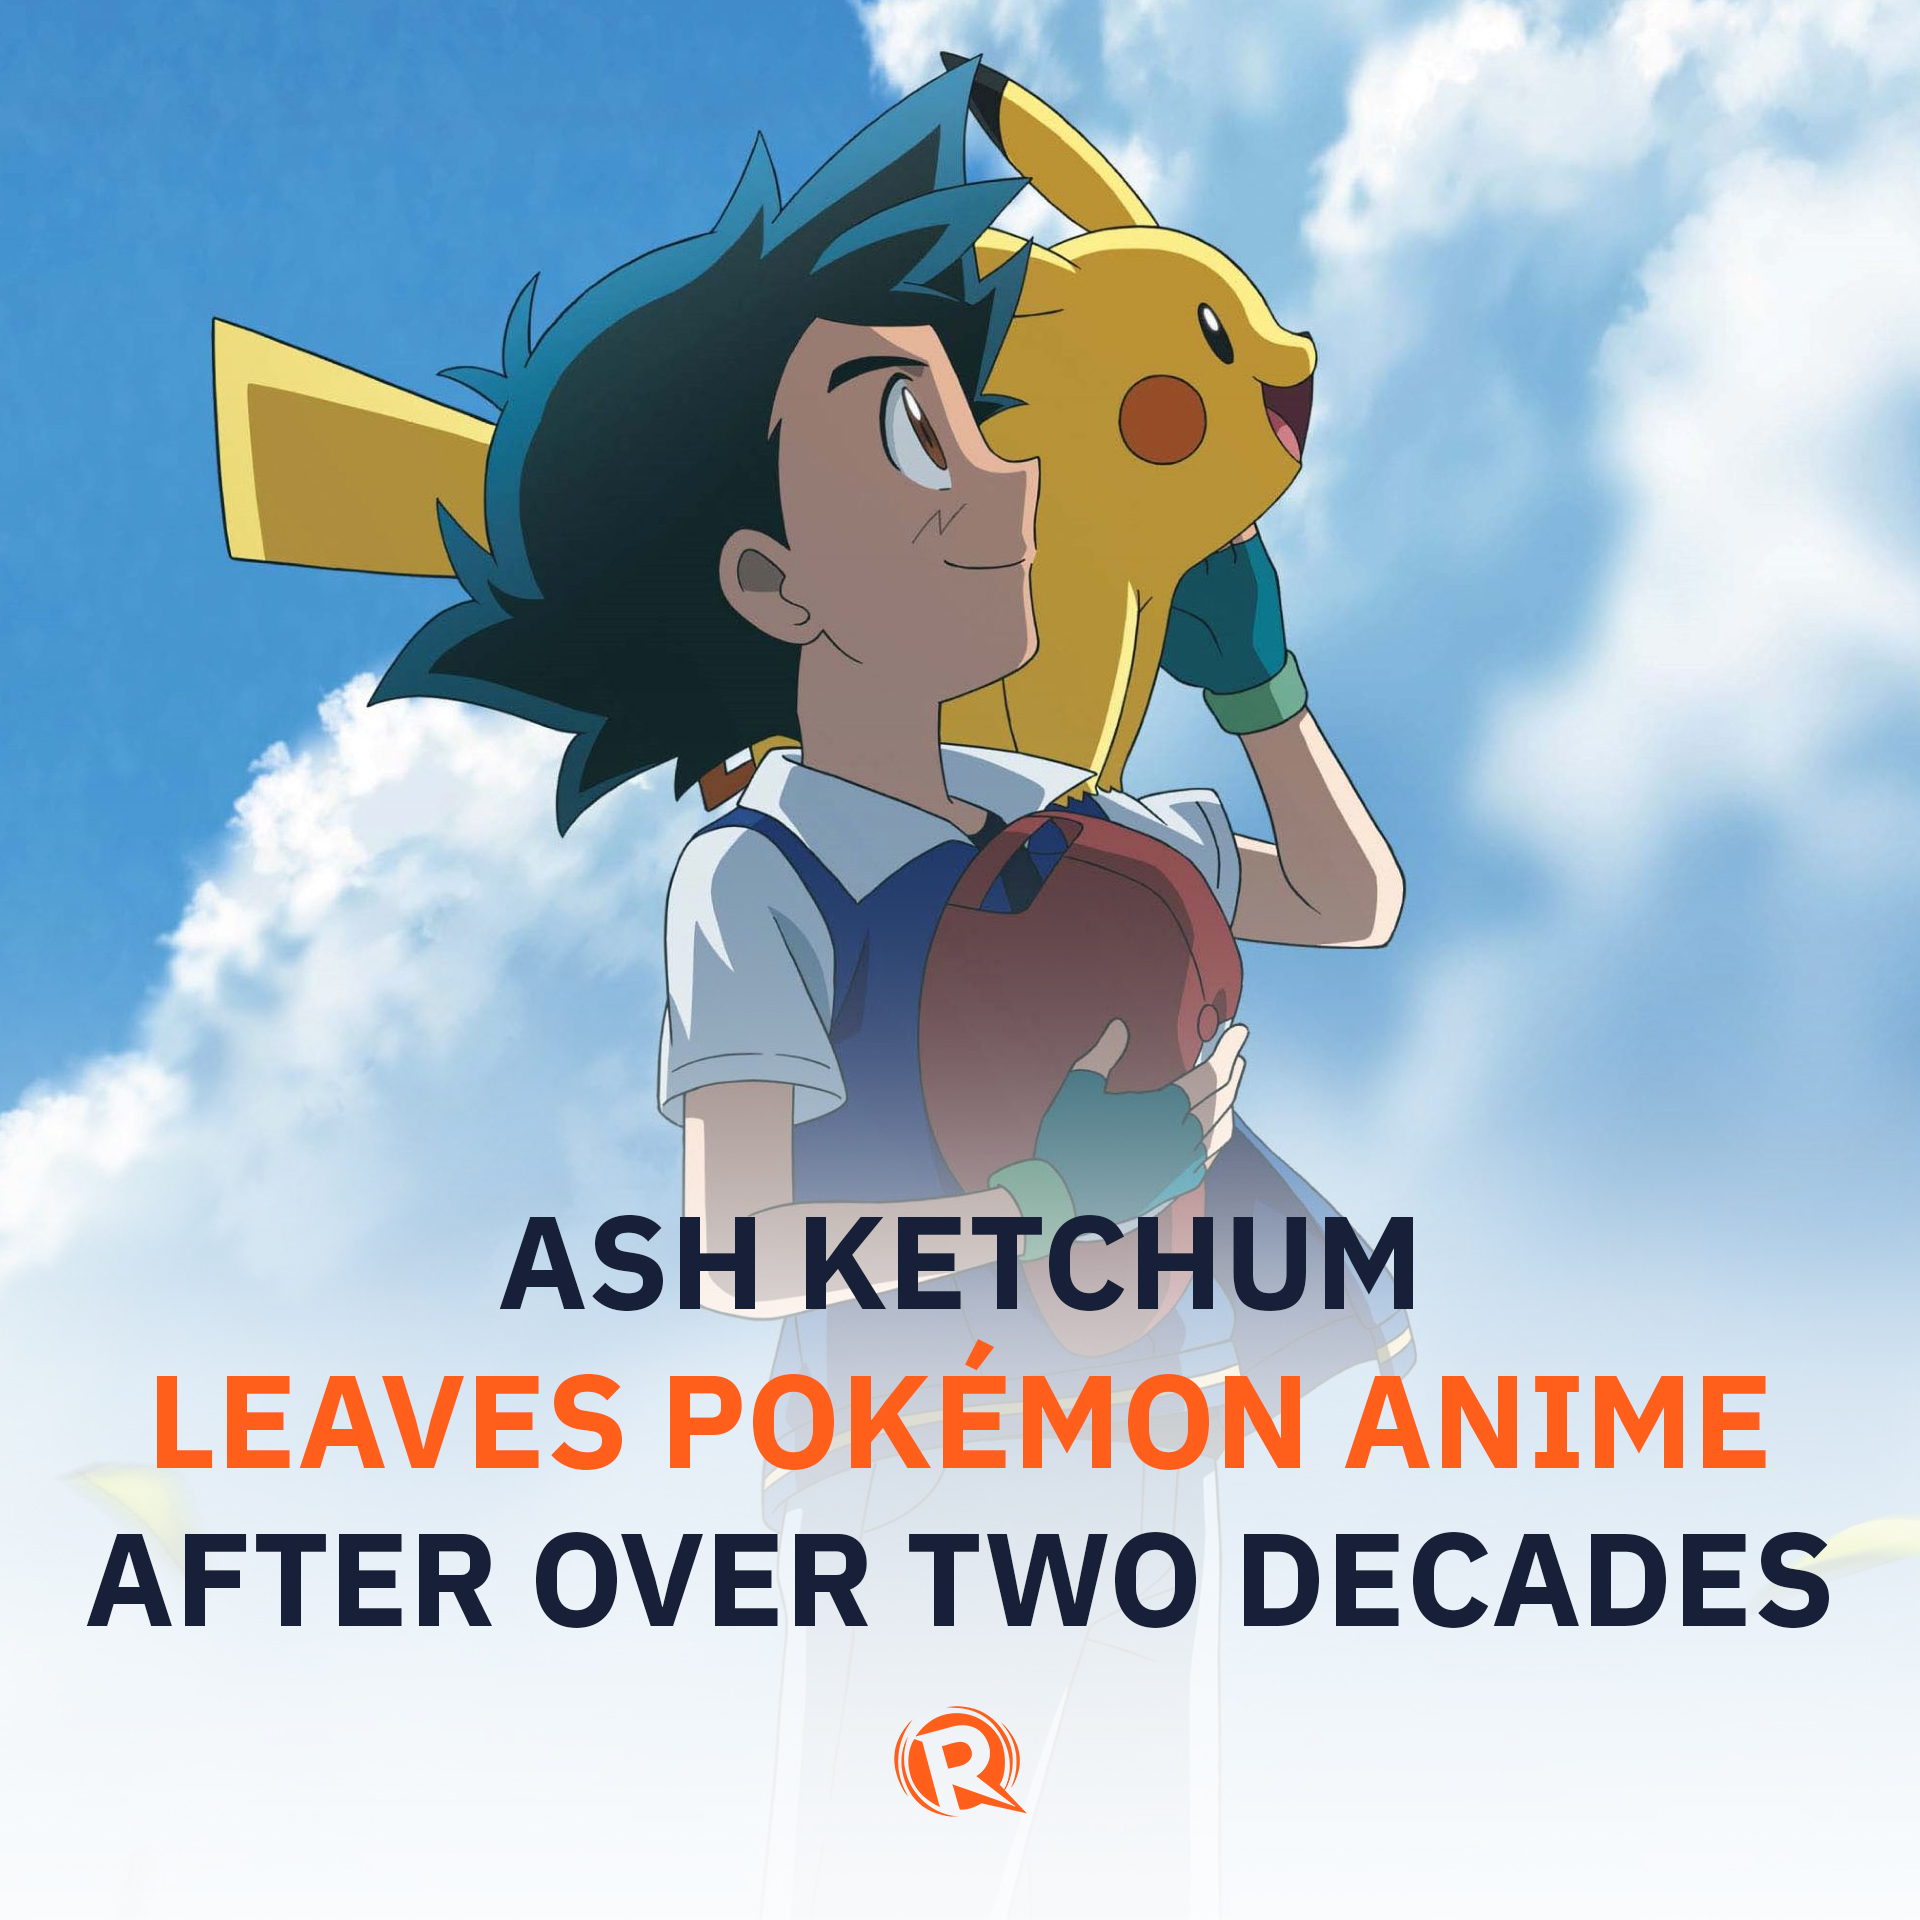 Ash Has Become A True Pokémon Master, What's Next For Him?